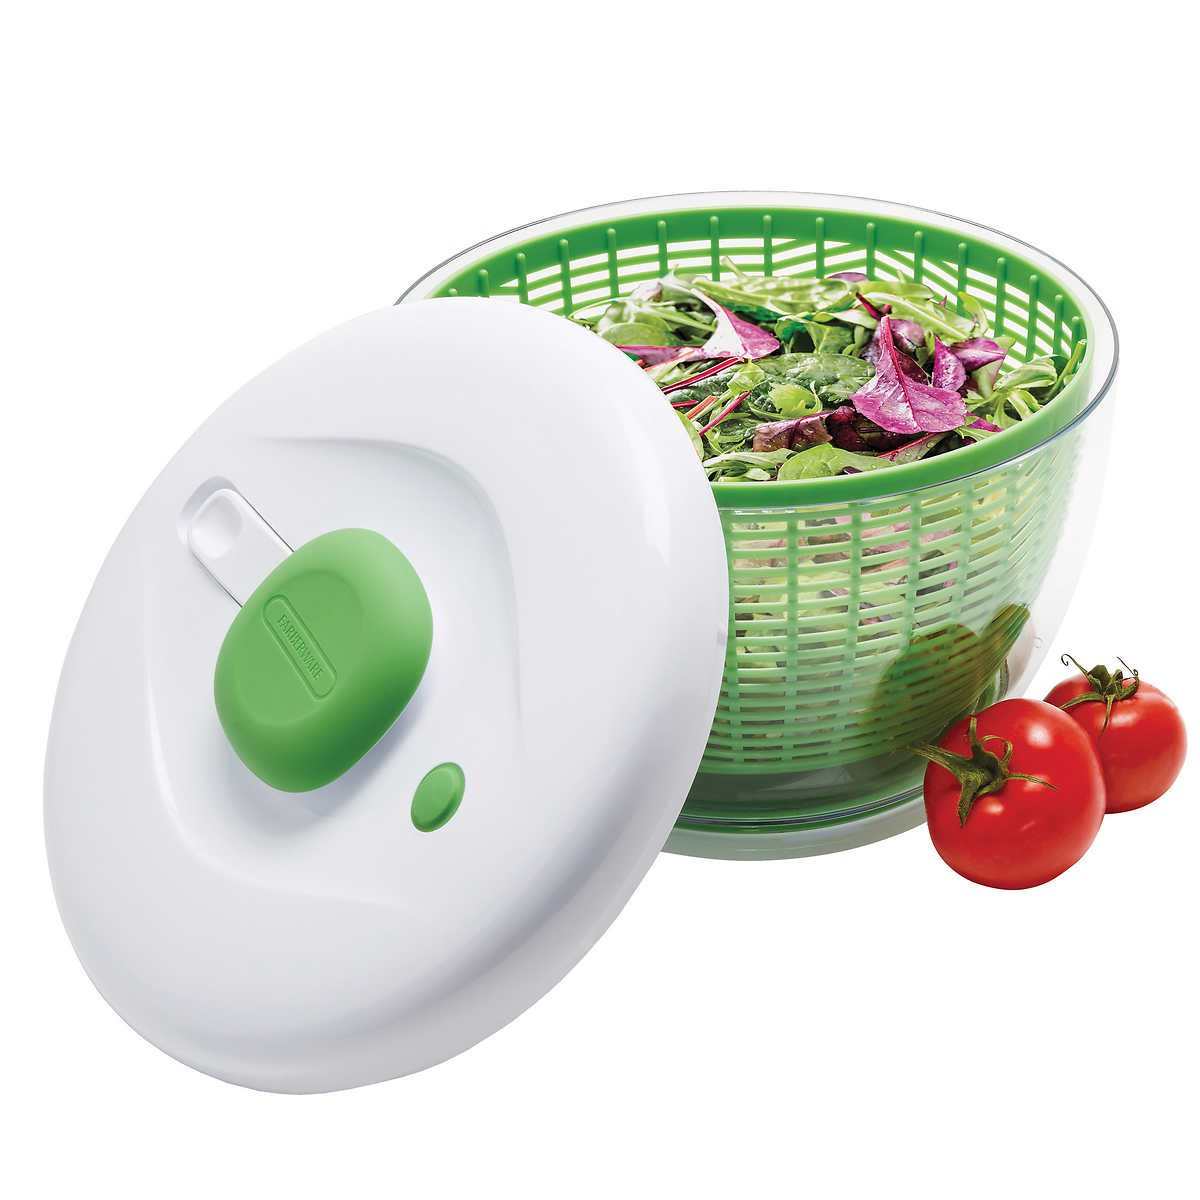 Salad Spinner Large Capacity Dryer With Double Layer Veggie Dryer